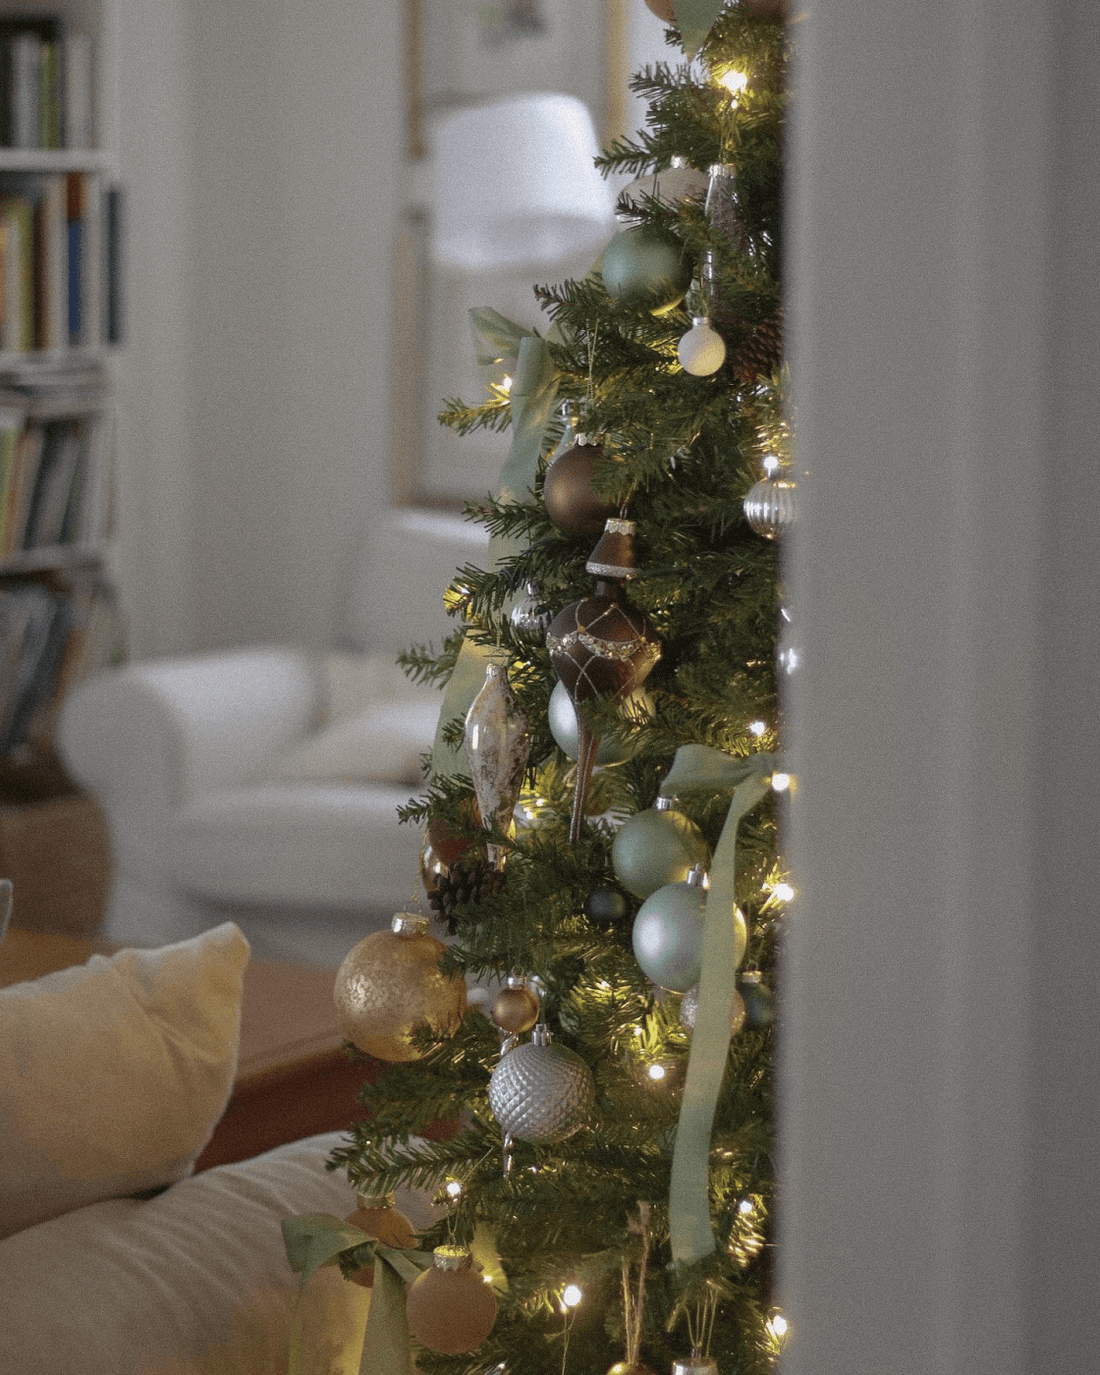 How to Create a Cozy and Festive Christmas Atmosphere at Home